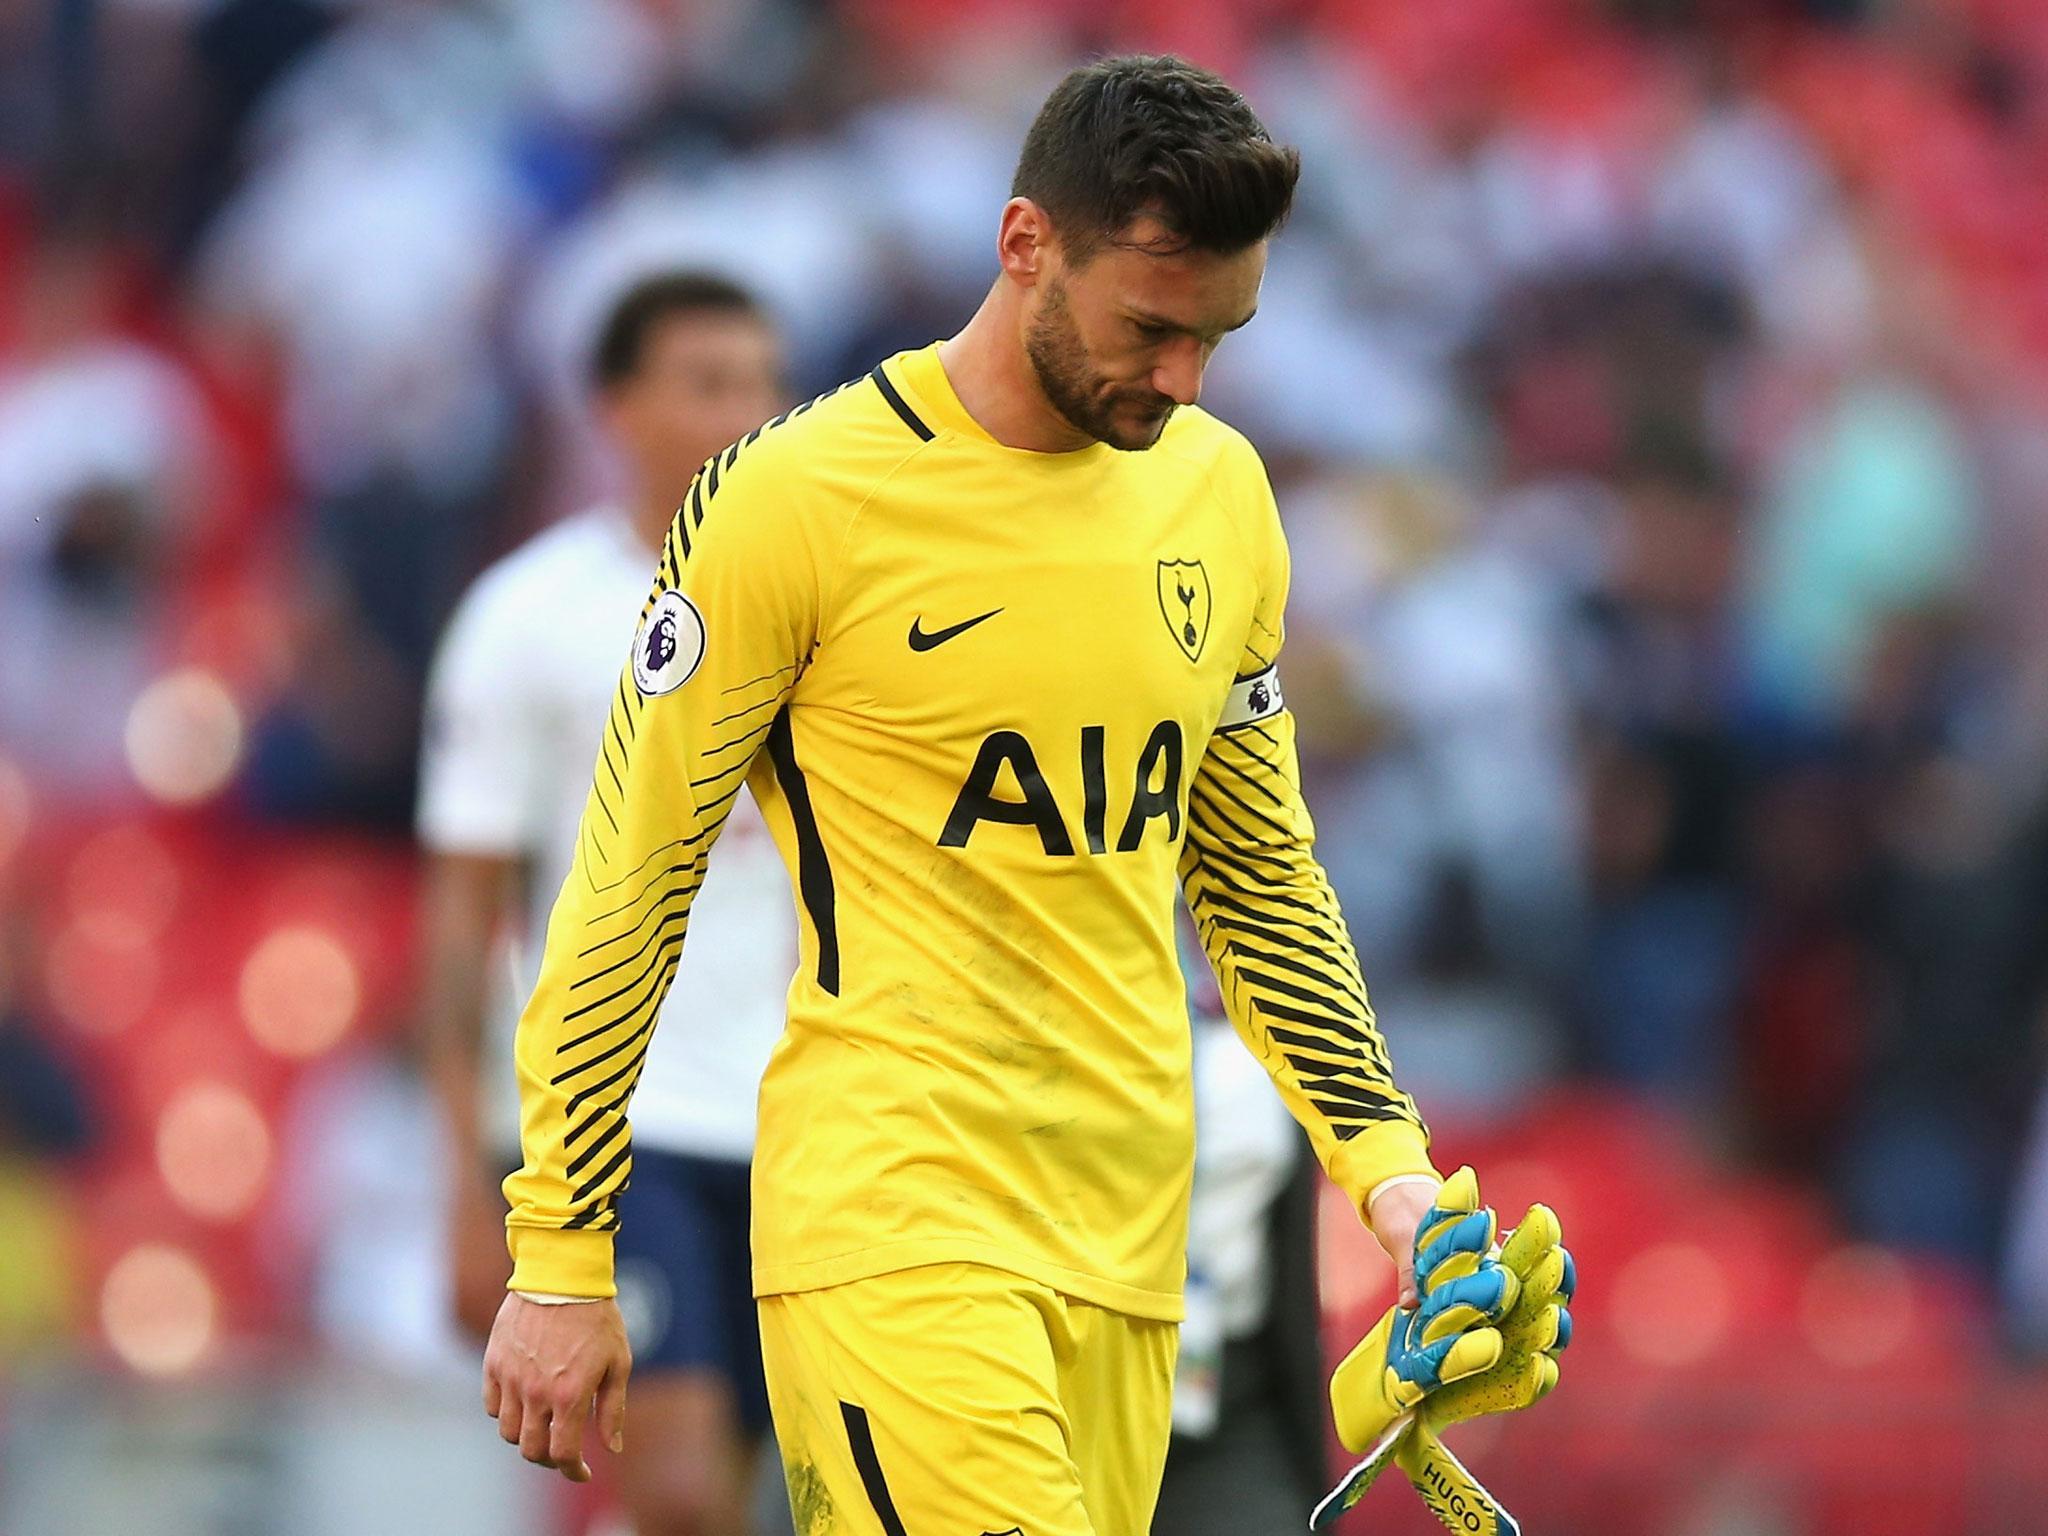 Hugo Lloris knows Tottenham must improve to turn things around at their new home